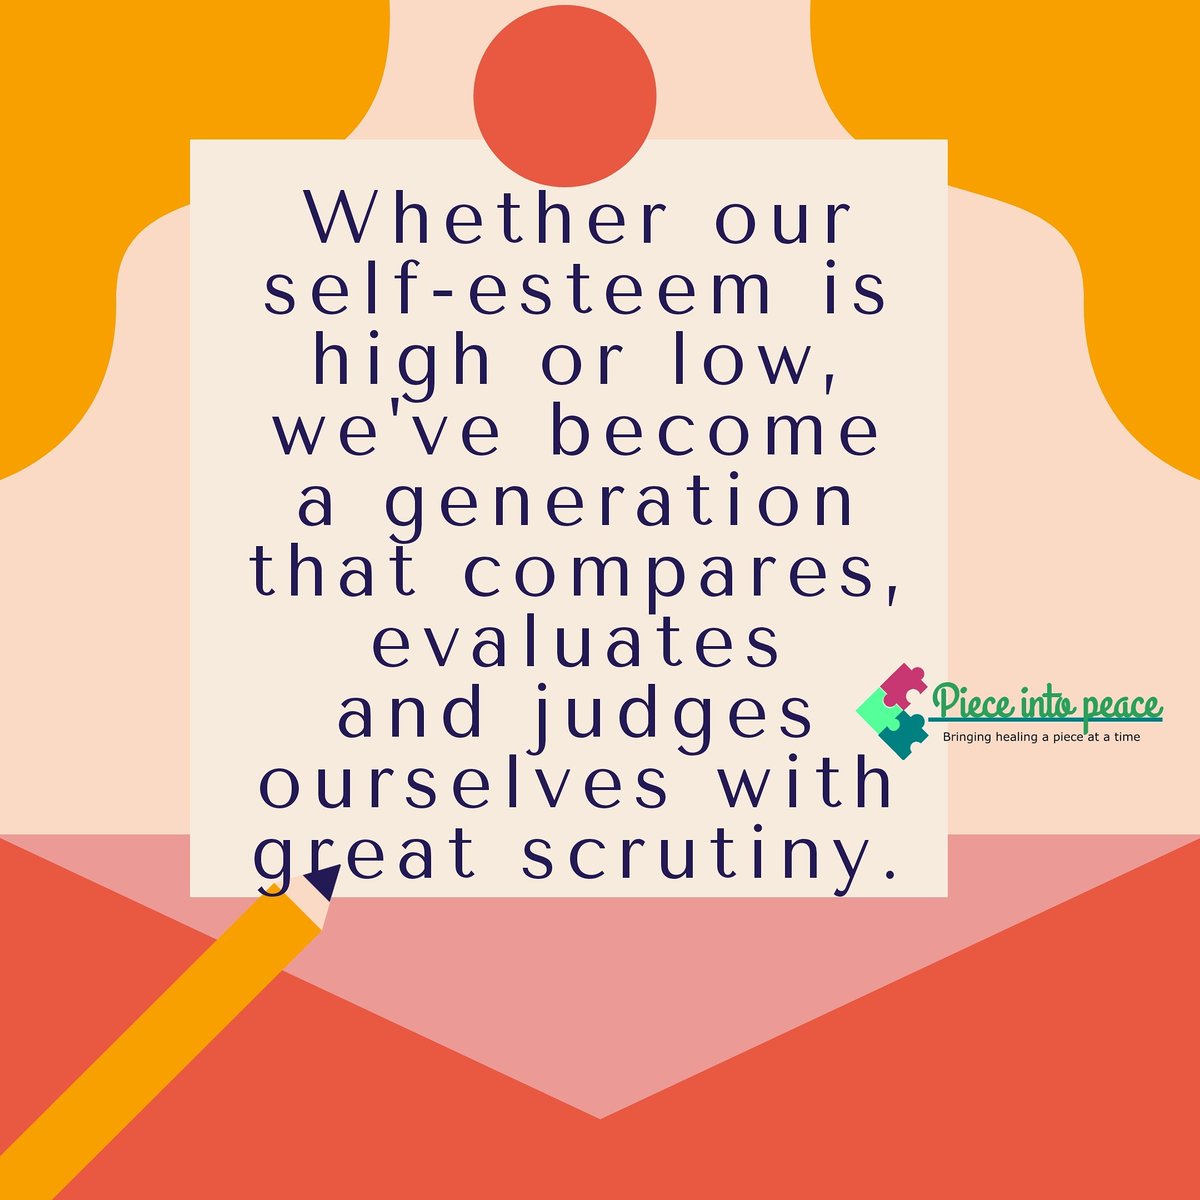 It doesn't matter if your self-esteem is high or low, one thing is clear; we are a generation that compares, evaluates and judges ourselves with great scrutiny.
#healfrominsecurity #standuptoyourcriticalvoice #standuptoyourself #impostersyndromeisreal #compassionforyourself